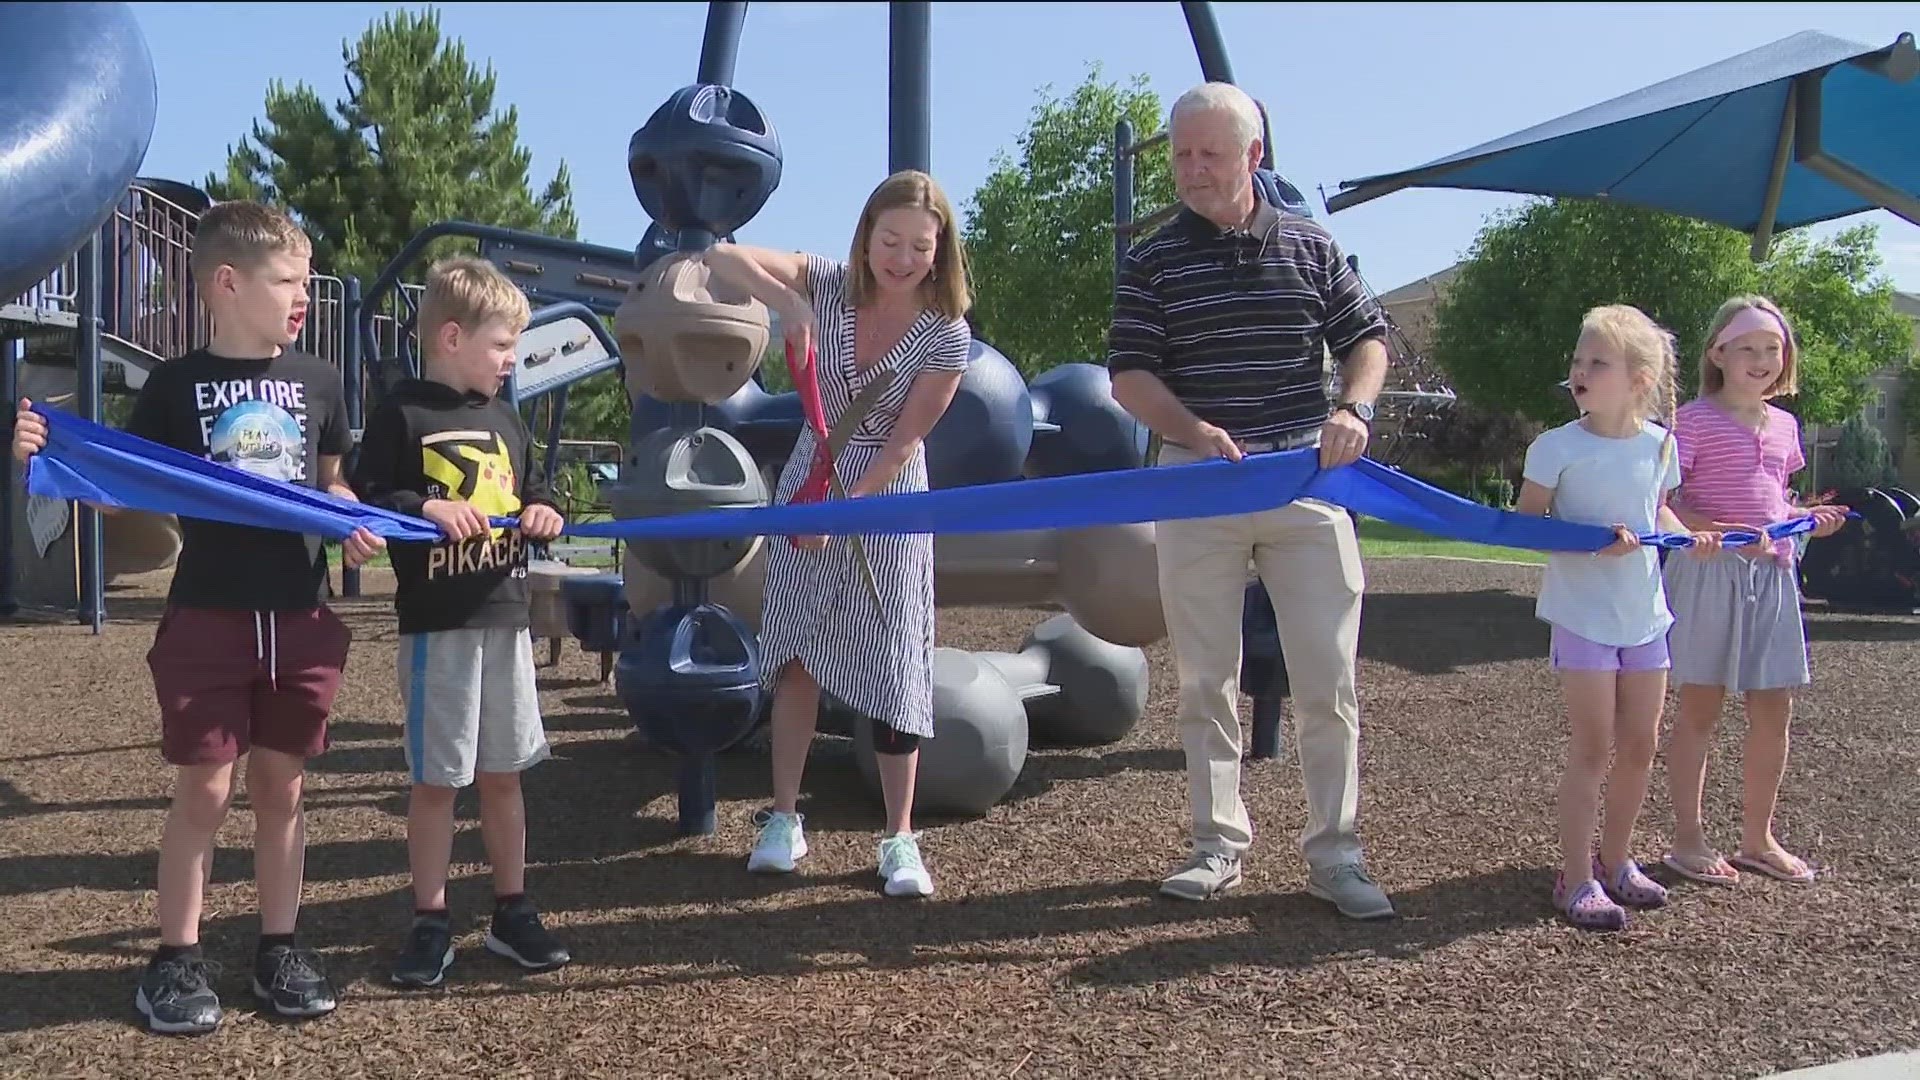 Tuesday's dedication of the Pine Grove Park on West Shoup Drive gives the City of Boise 16 playgrounds accessible for children of all abilities.